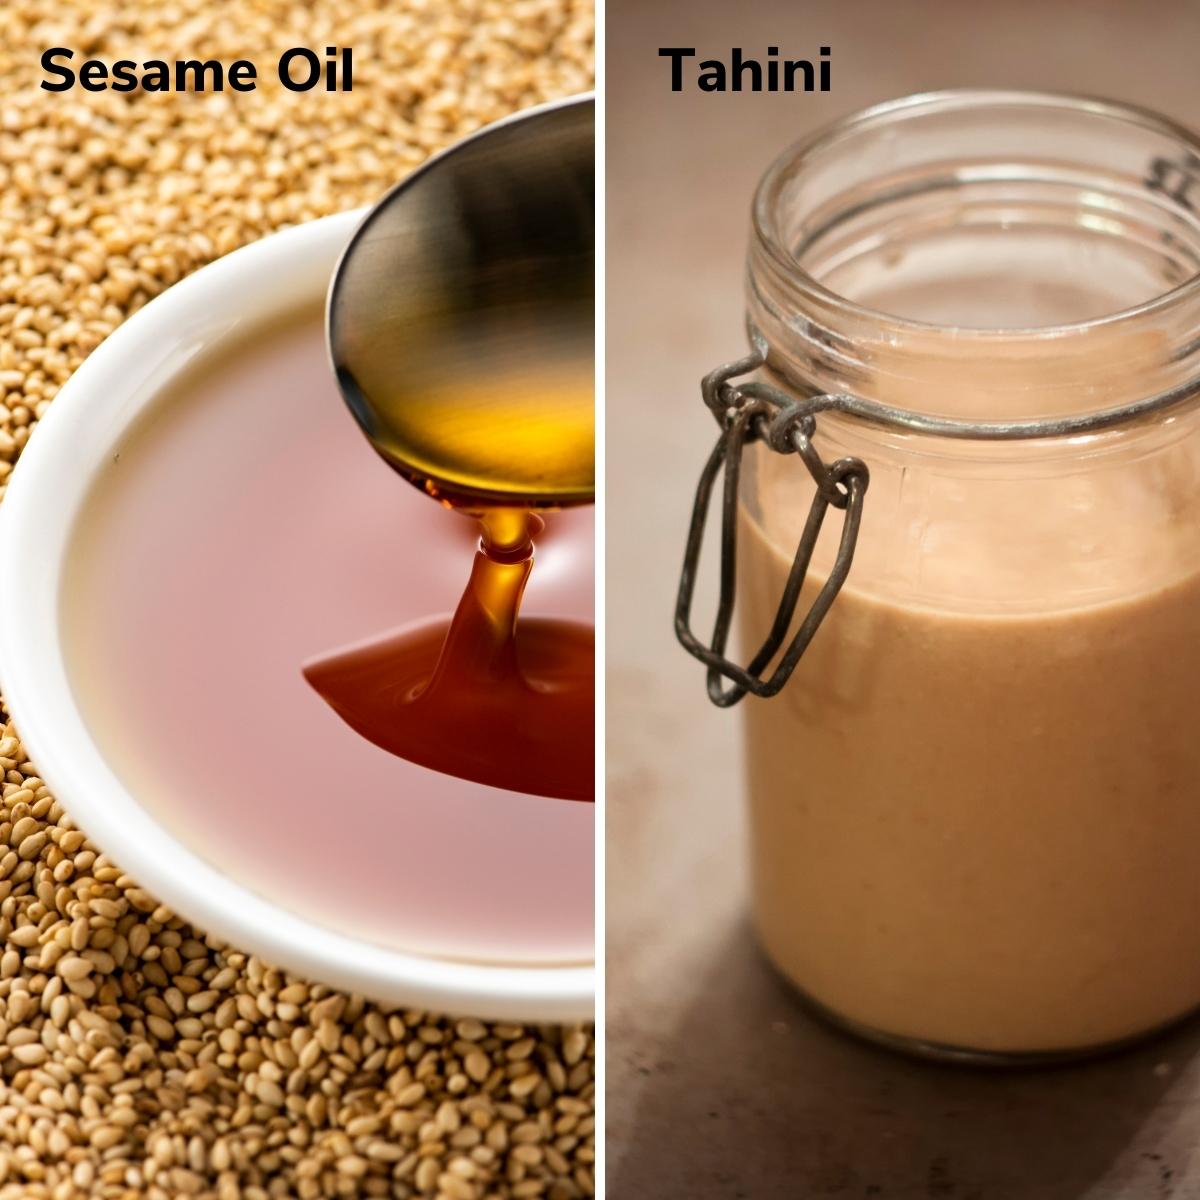 Photo of sesame oil on the left and Creamy tahini on the right.